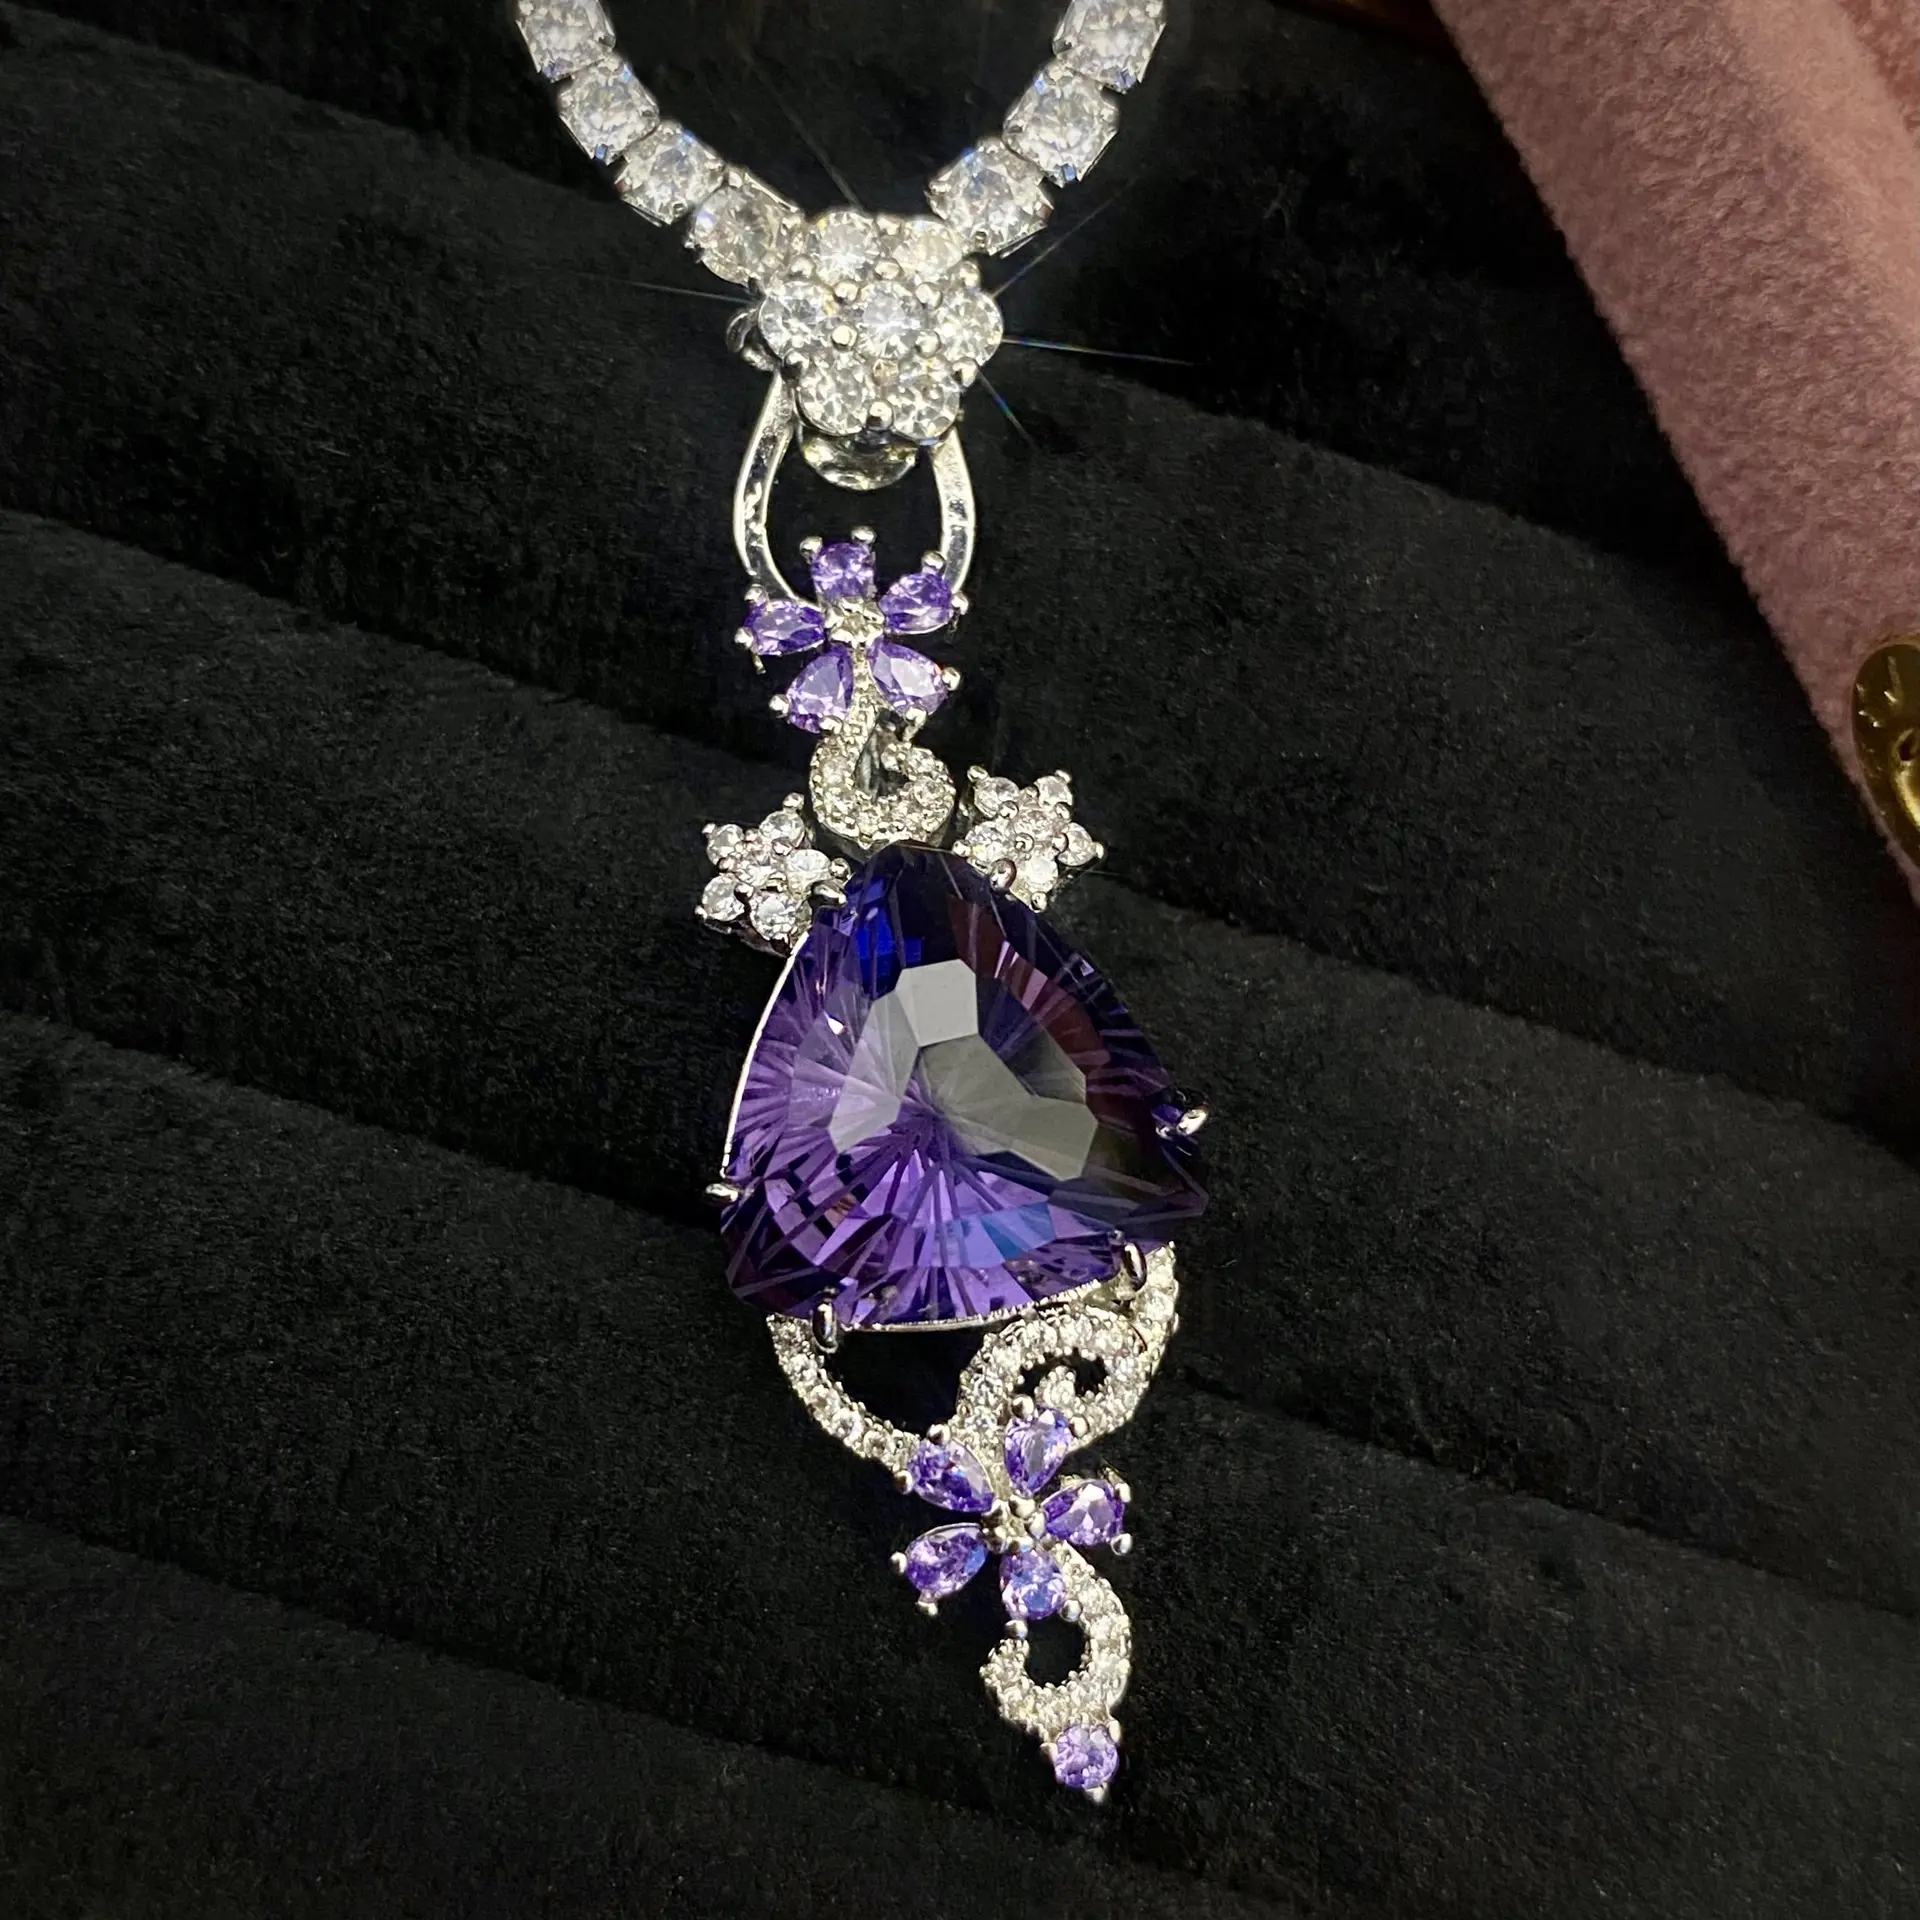 Custom Queen Scepter Necklace New Light Luxury Queen Fashion Cut Amethyst Pendant Colourful Jewellery